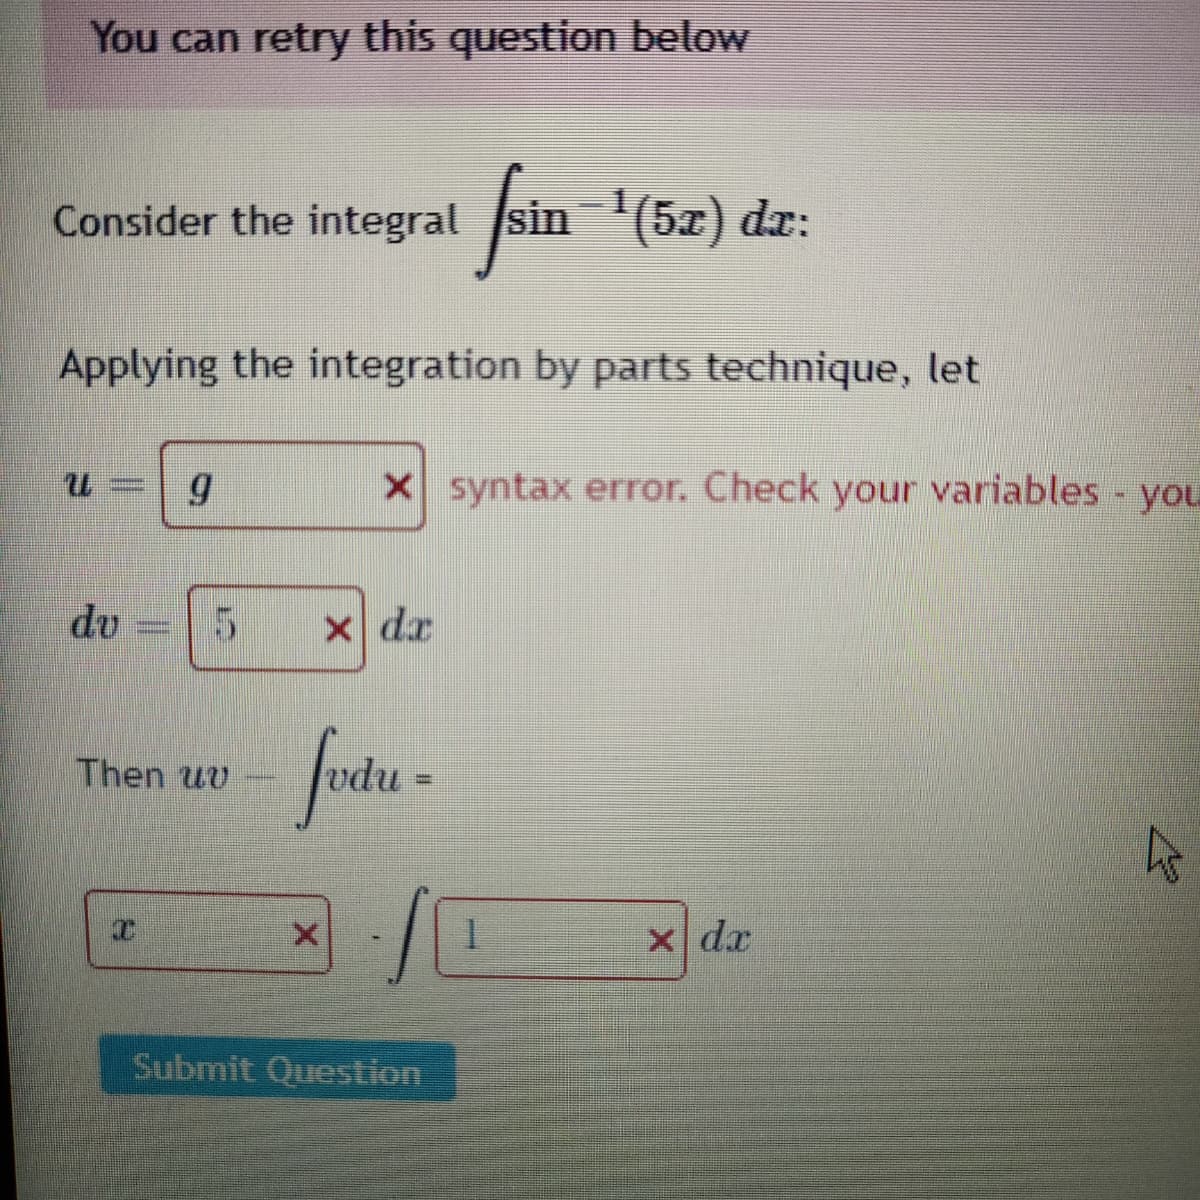 You can retry this question below
Consider the integral sin (5x) dr:
Applying the integration by parts technique, let
X syntax error. Check your variables - you
du
5.
x dr
futu-
Then uv
X dx
Submit Question
